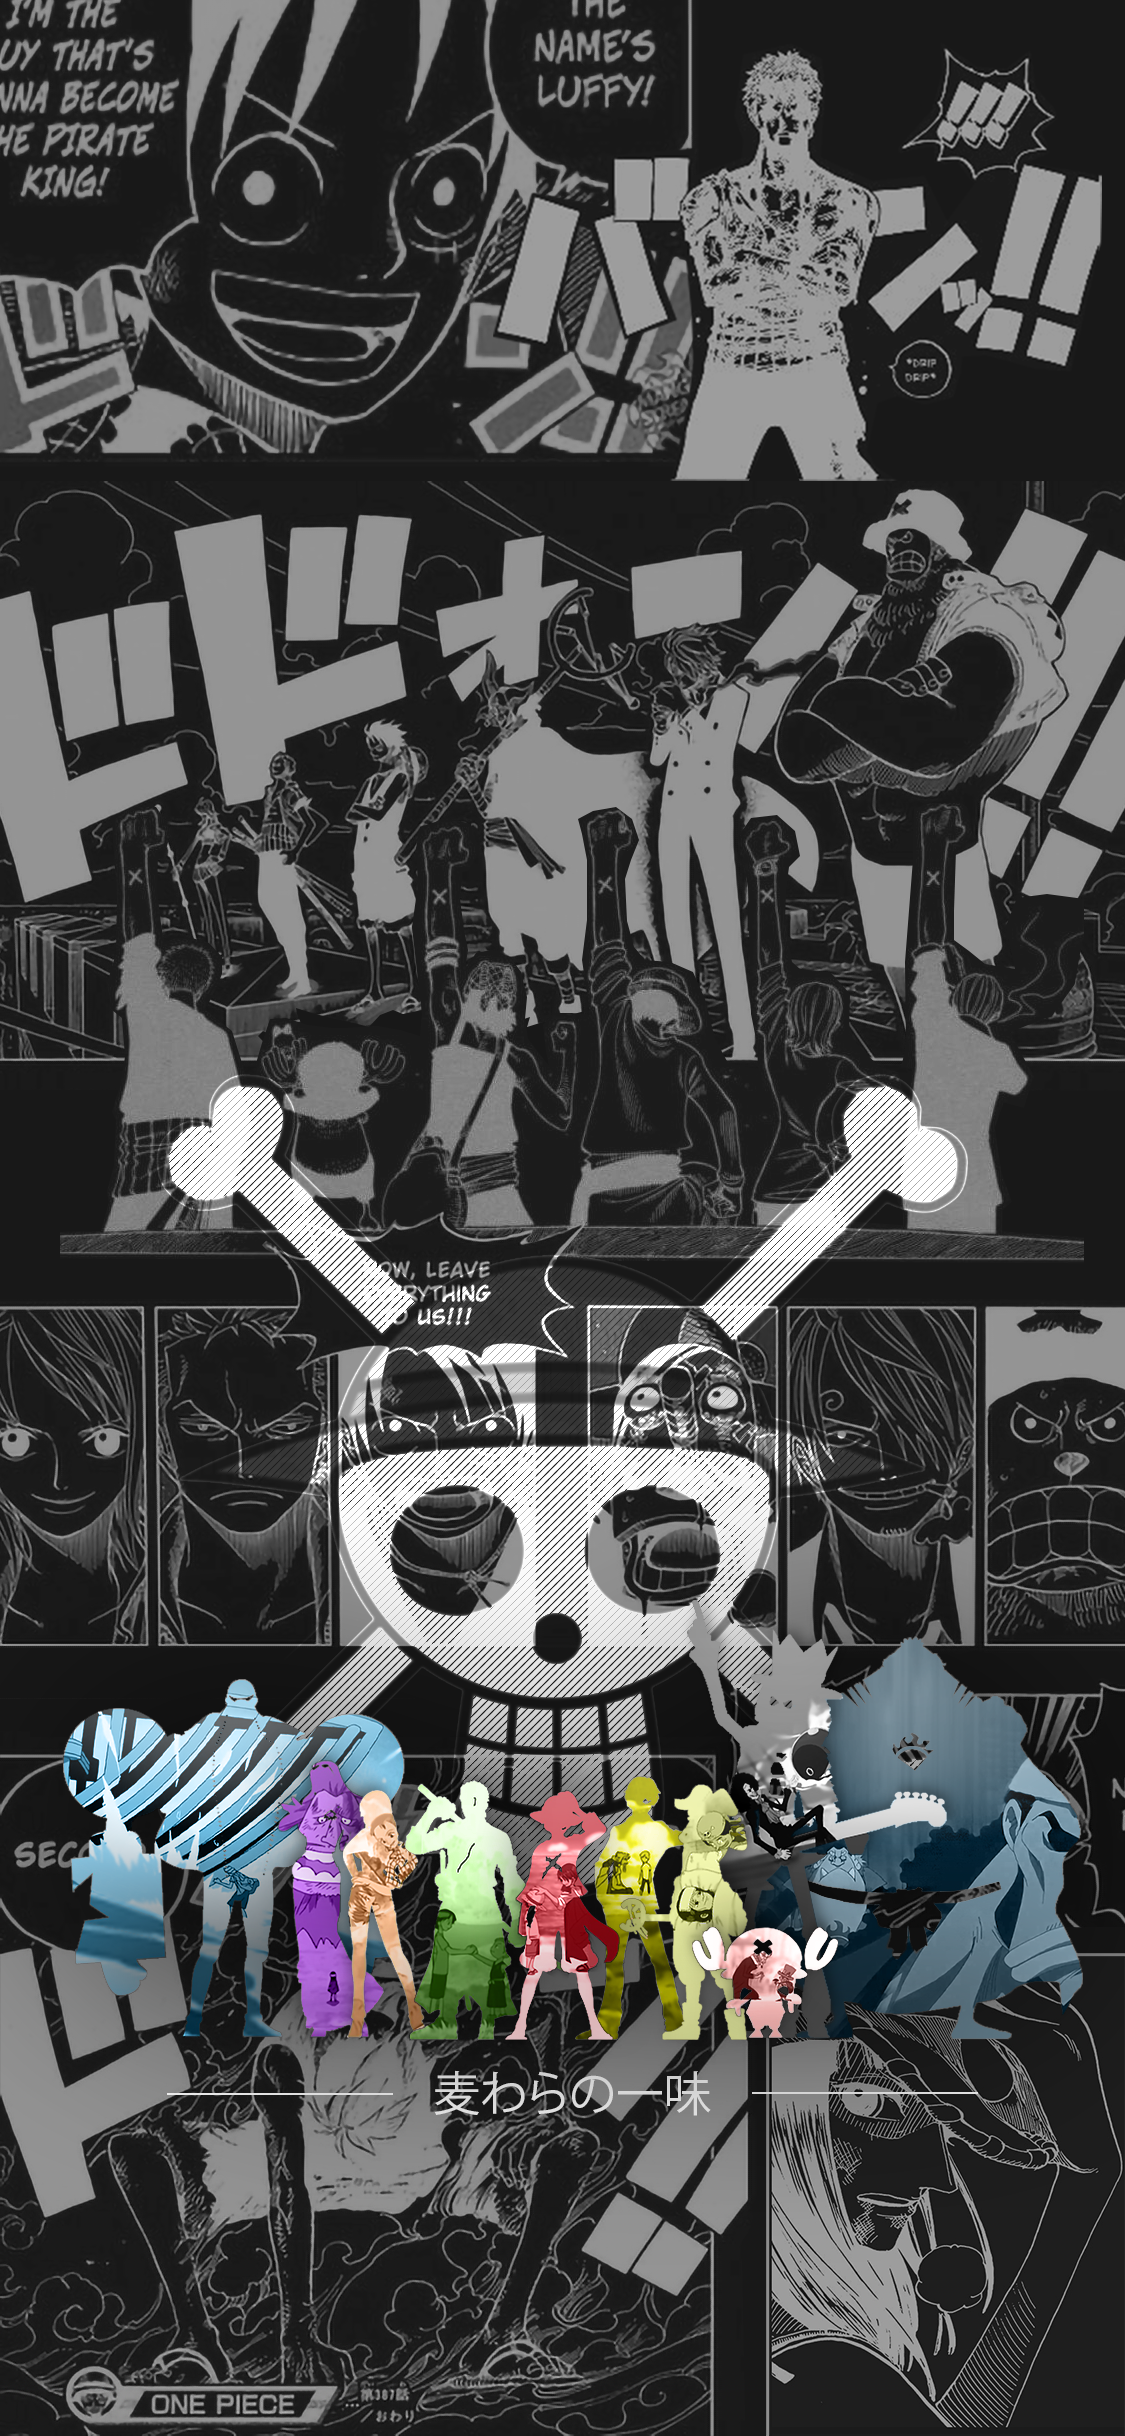 One Piece Iphone Wallpaper By Afifrafiqin On Deviantart